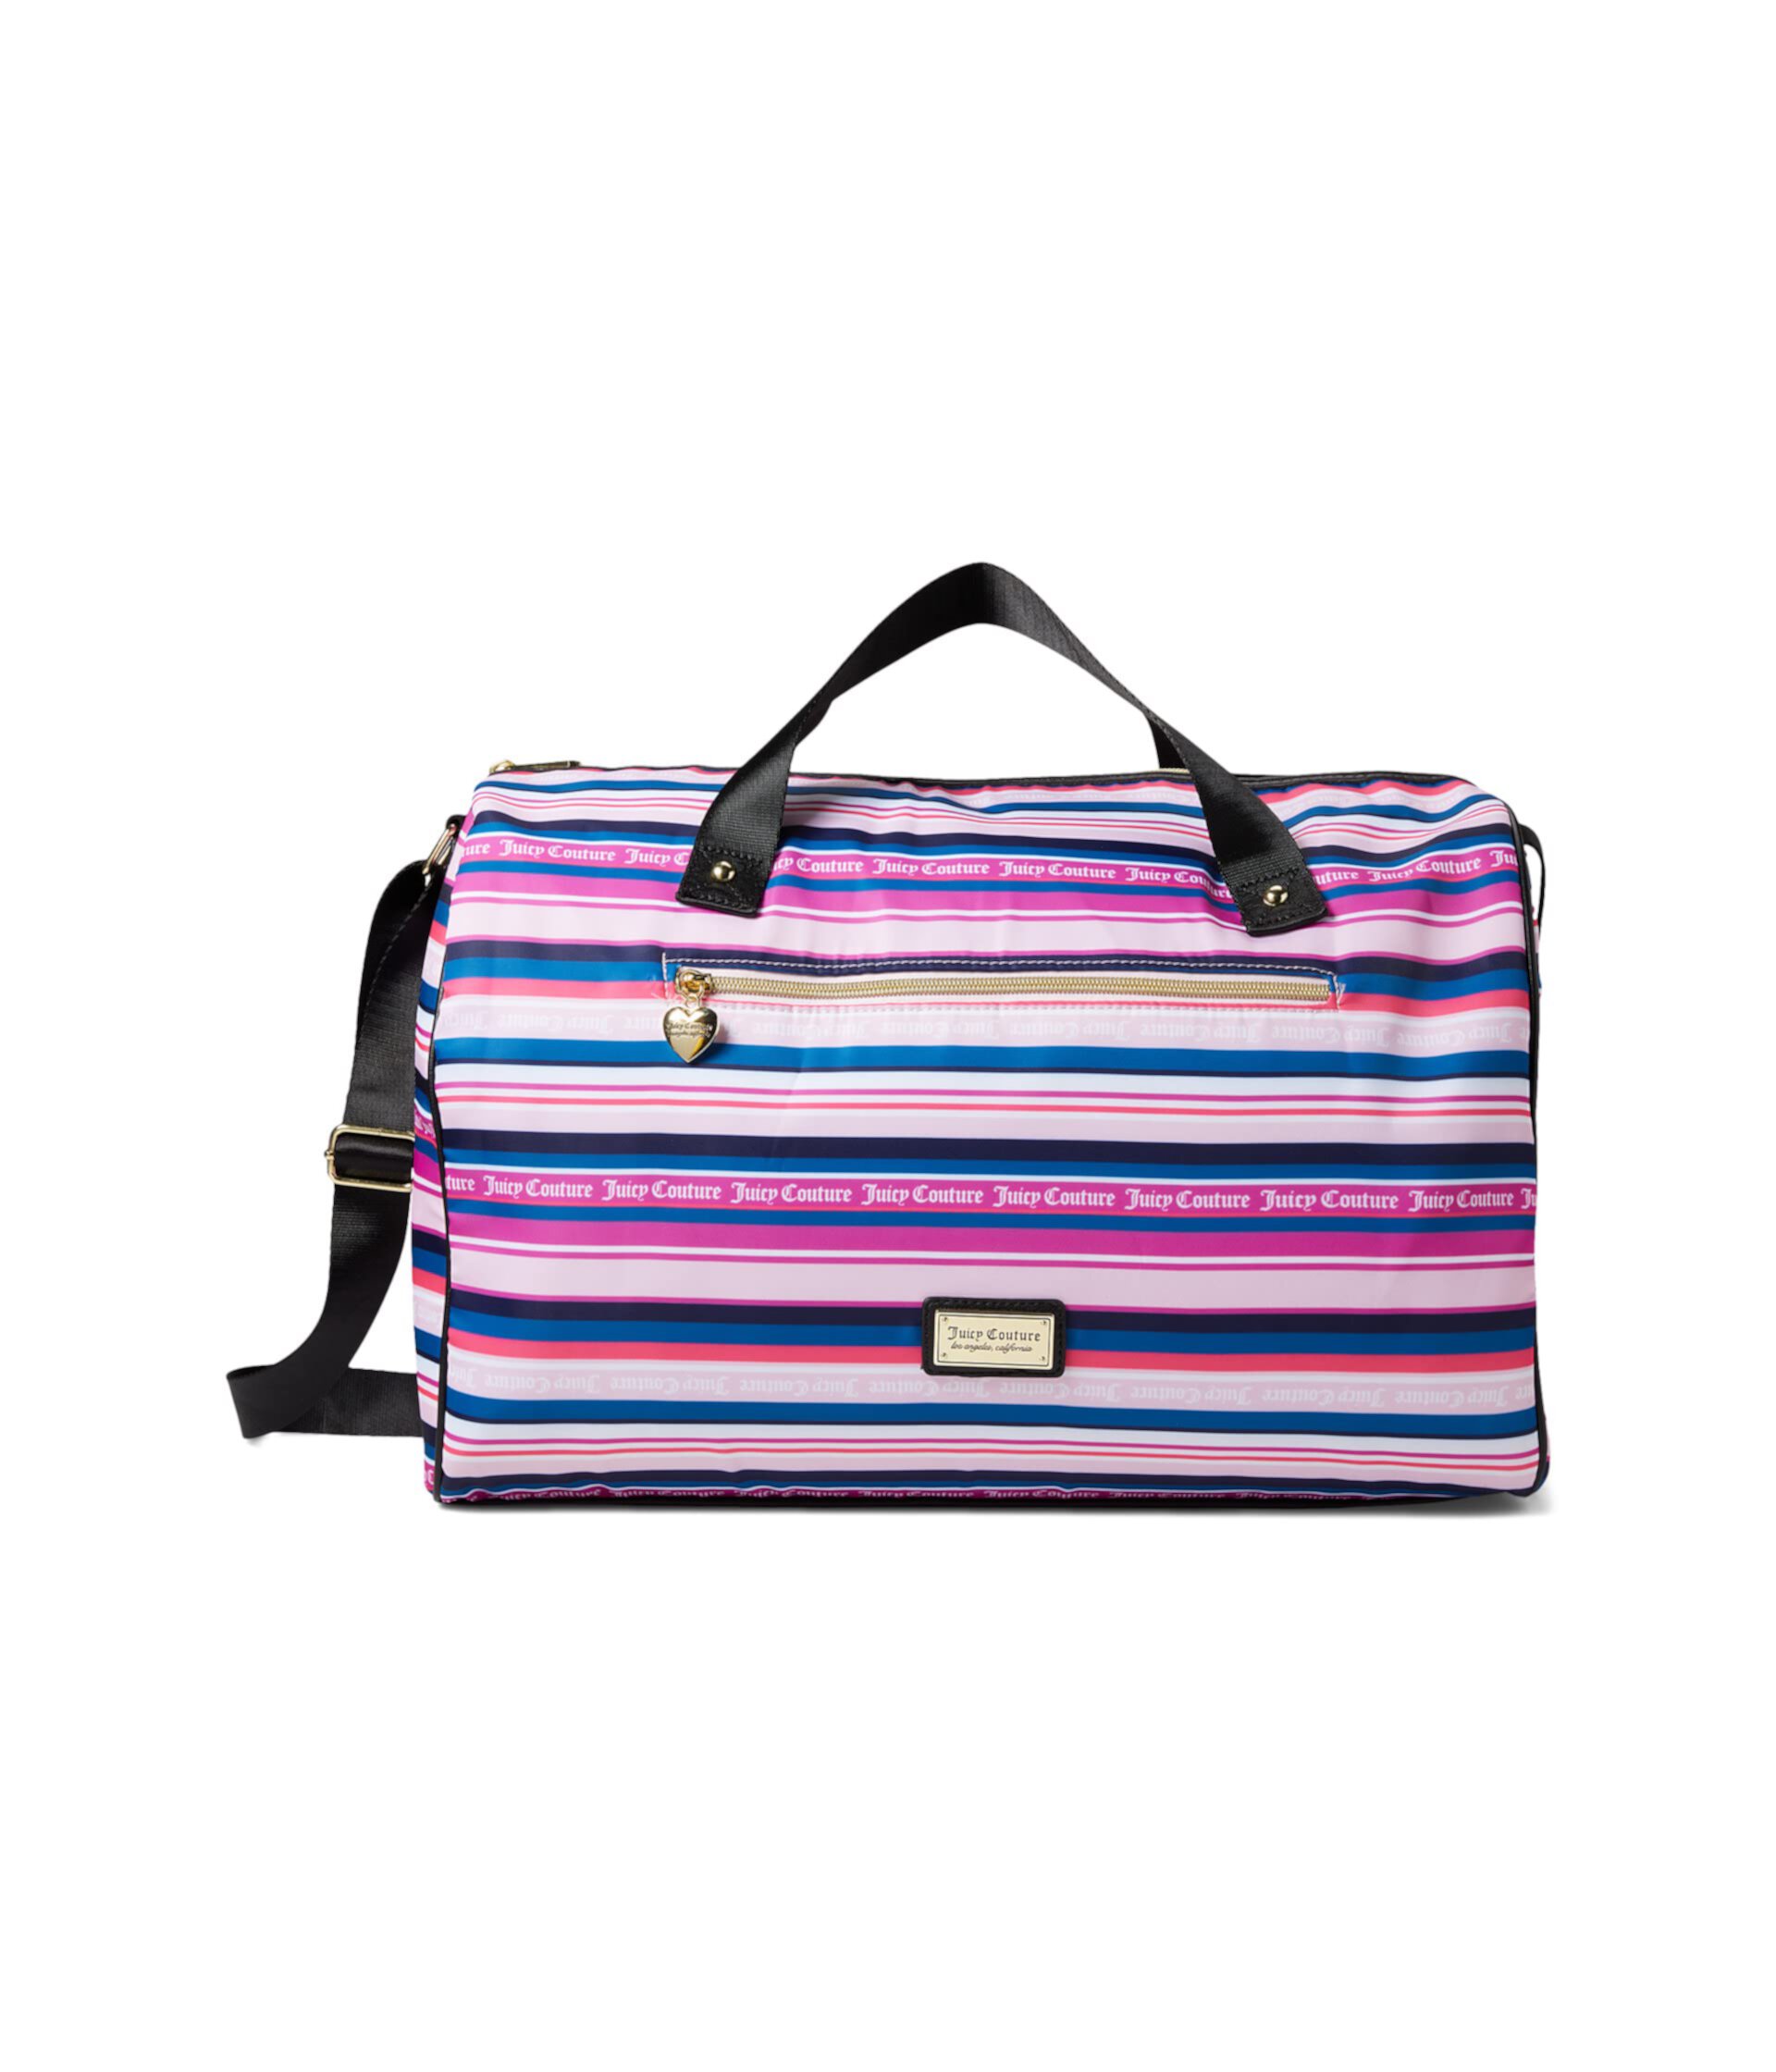 Бестселлер Duffel Juicy Couture